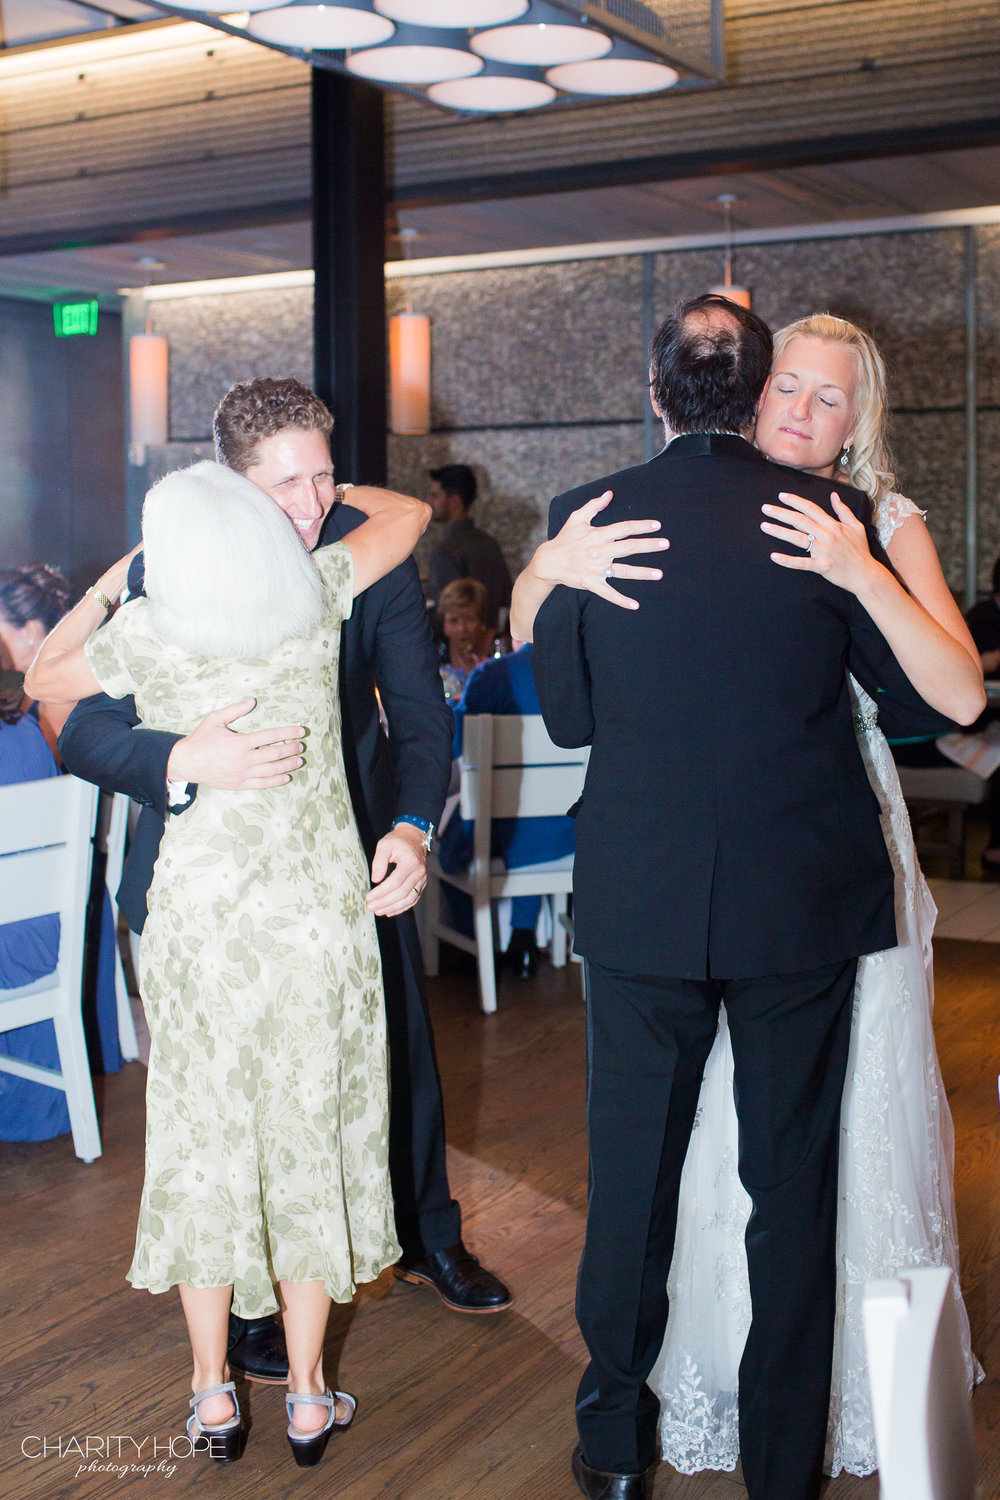  So sweet seeing them dance with their parents.  